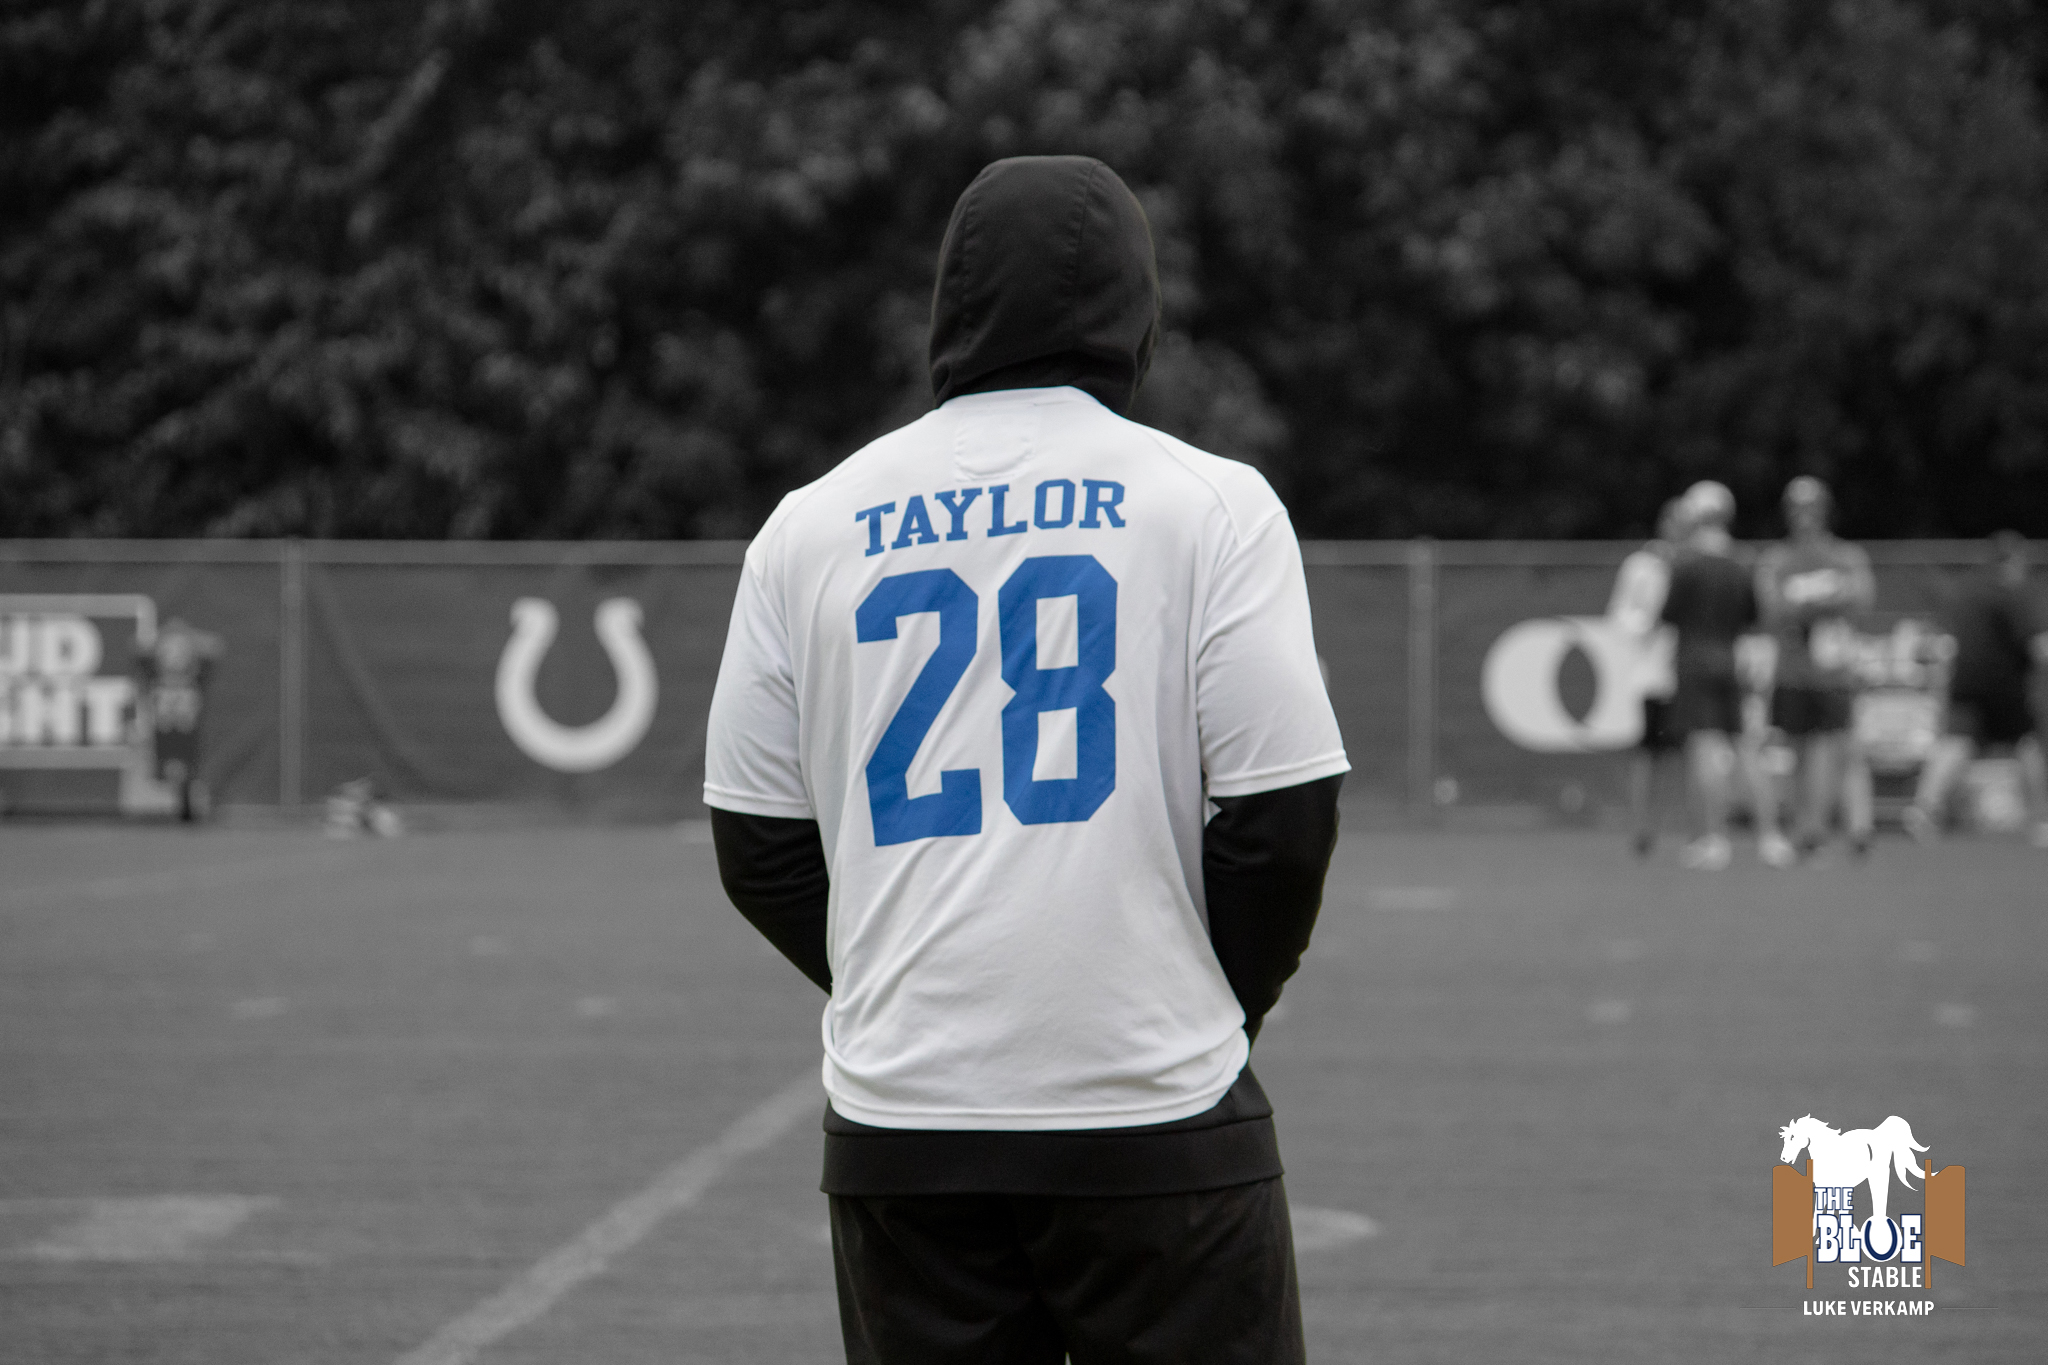 Jonathan Taylor Says He Is Committed To The 2023 Colts… Future TBD